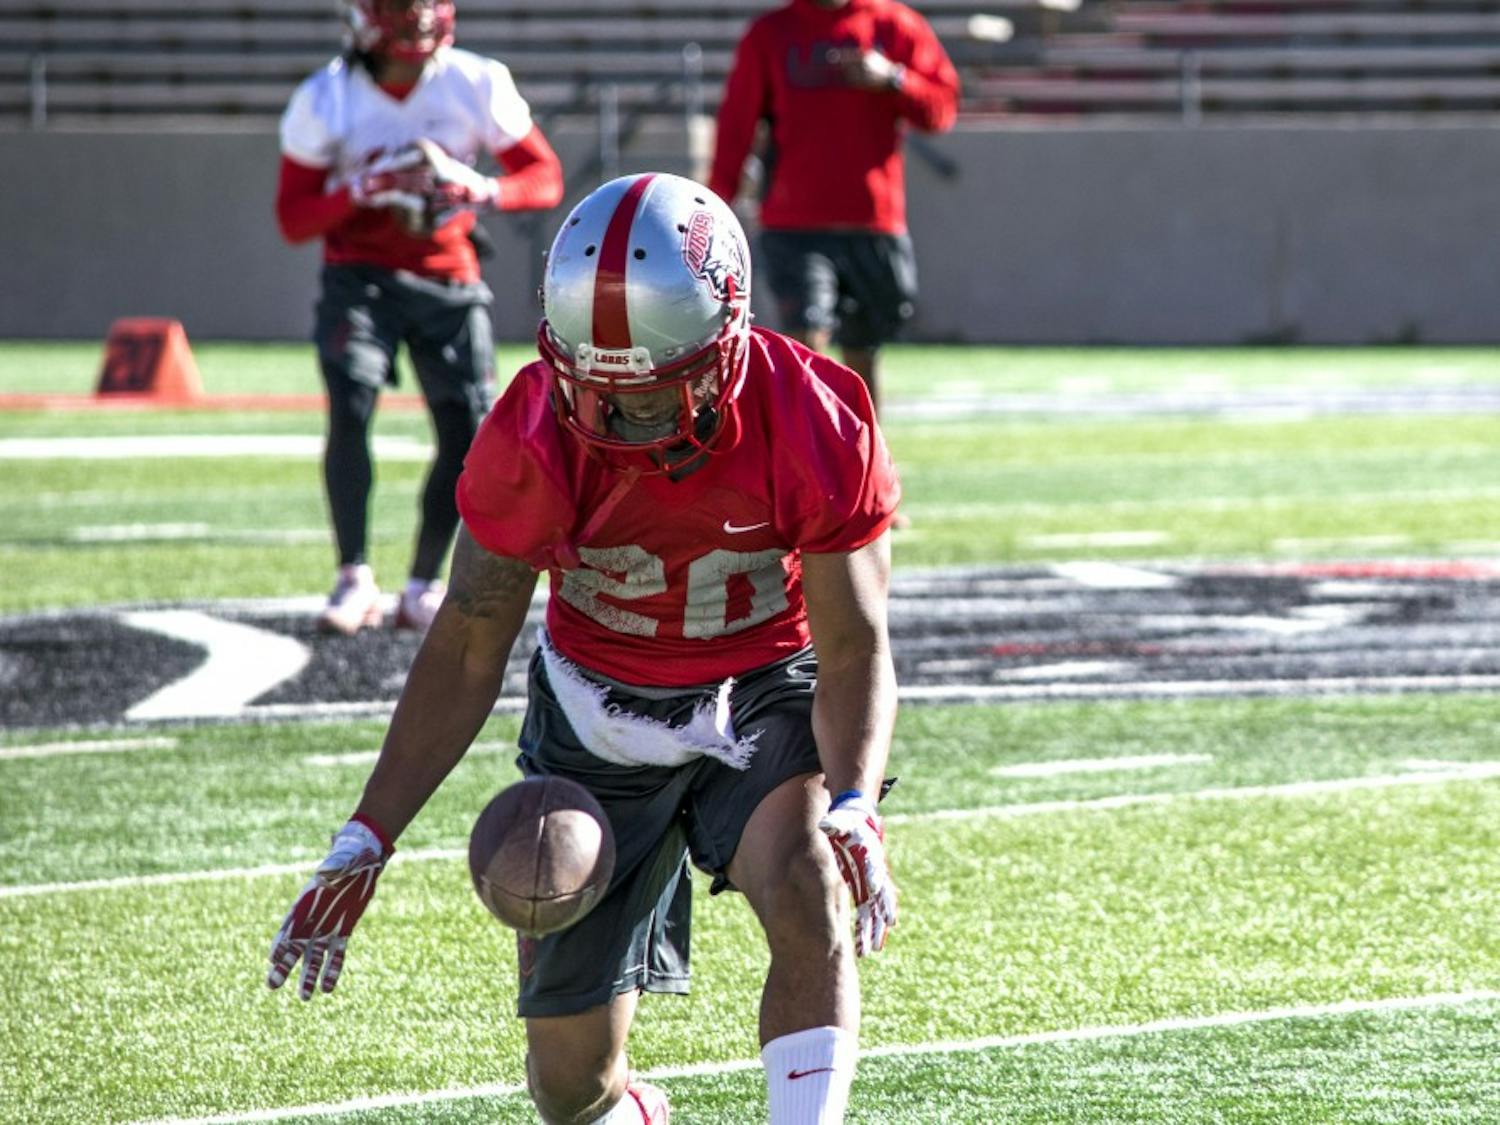 Junior running back Daryl Chestnut catches a pass Wednesday March 23, 2016 at University Stadium during a practice. The Lobos had a scrimmage last Friday and also hosted 75 coaches for a spring coaches clinic.